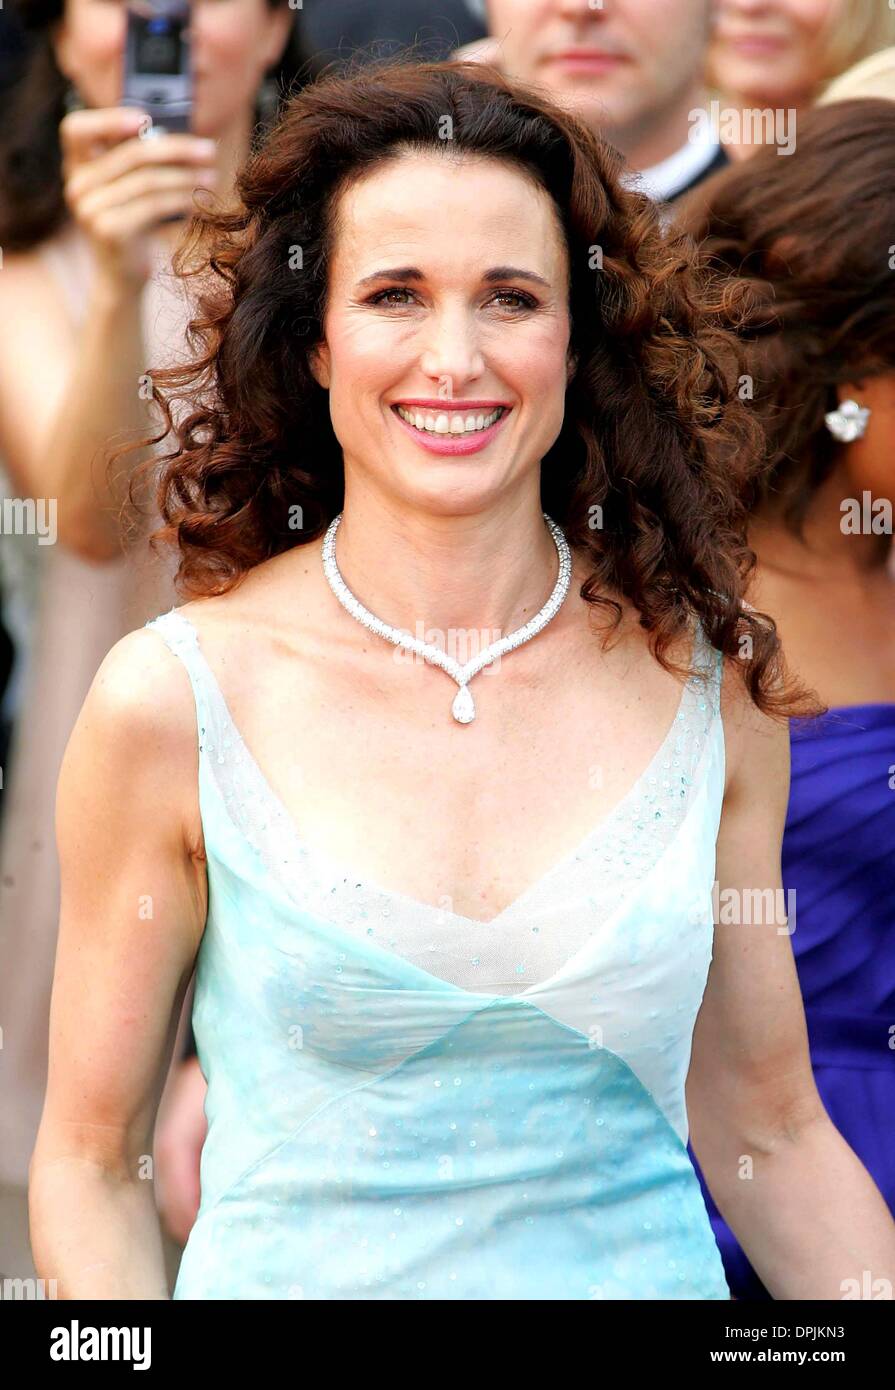 May 19, 2006 - Palais De Festival, CANNES, FRANCE - K47927.ANDIE MACDOWELL.ATTEND THE PREMIER OF THE WIND THAT SHAKES THE BARLEY IN CANNES.DIRECTOR & ACTORS.CANNES, FRANCE. DAVID GADD/ /   2006.(Credit Image: © Globe Photos/ZUMAPRESS.com) Stock Photo